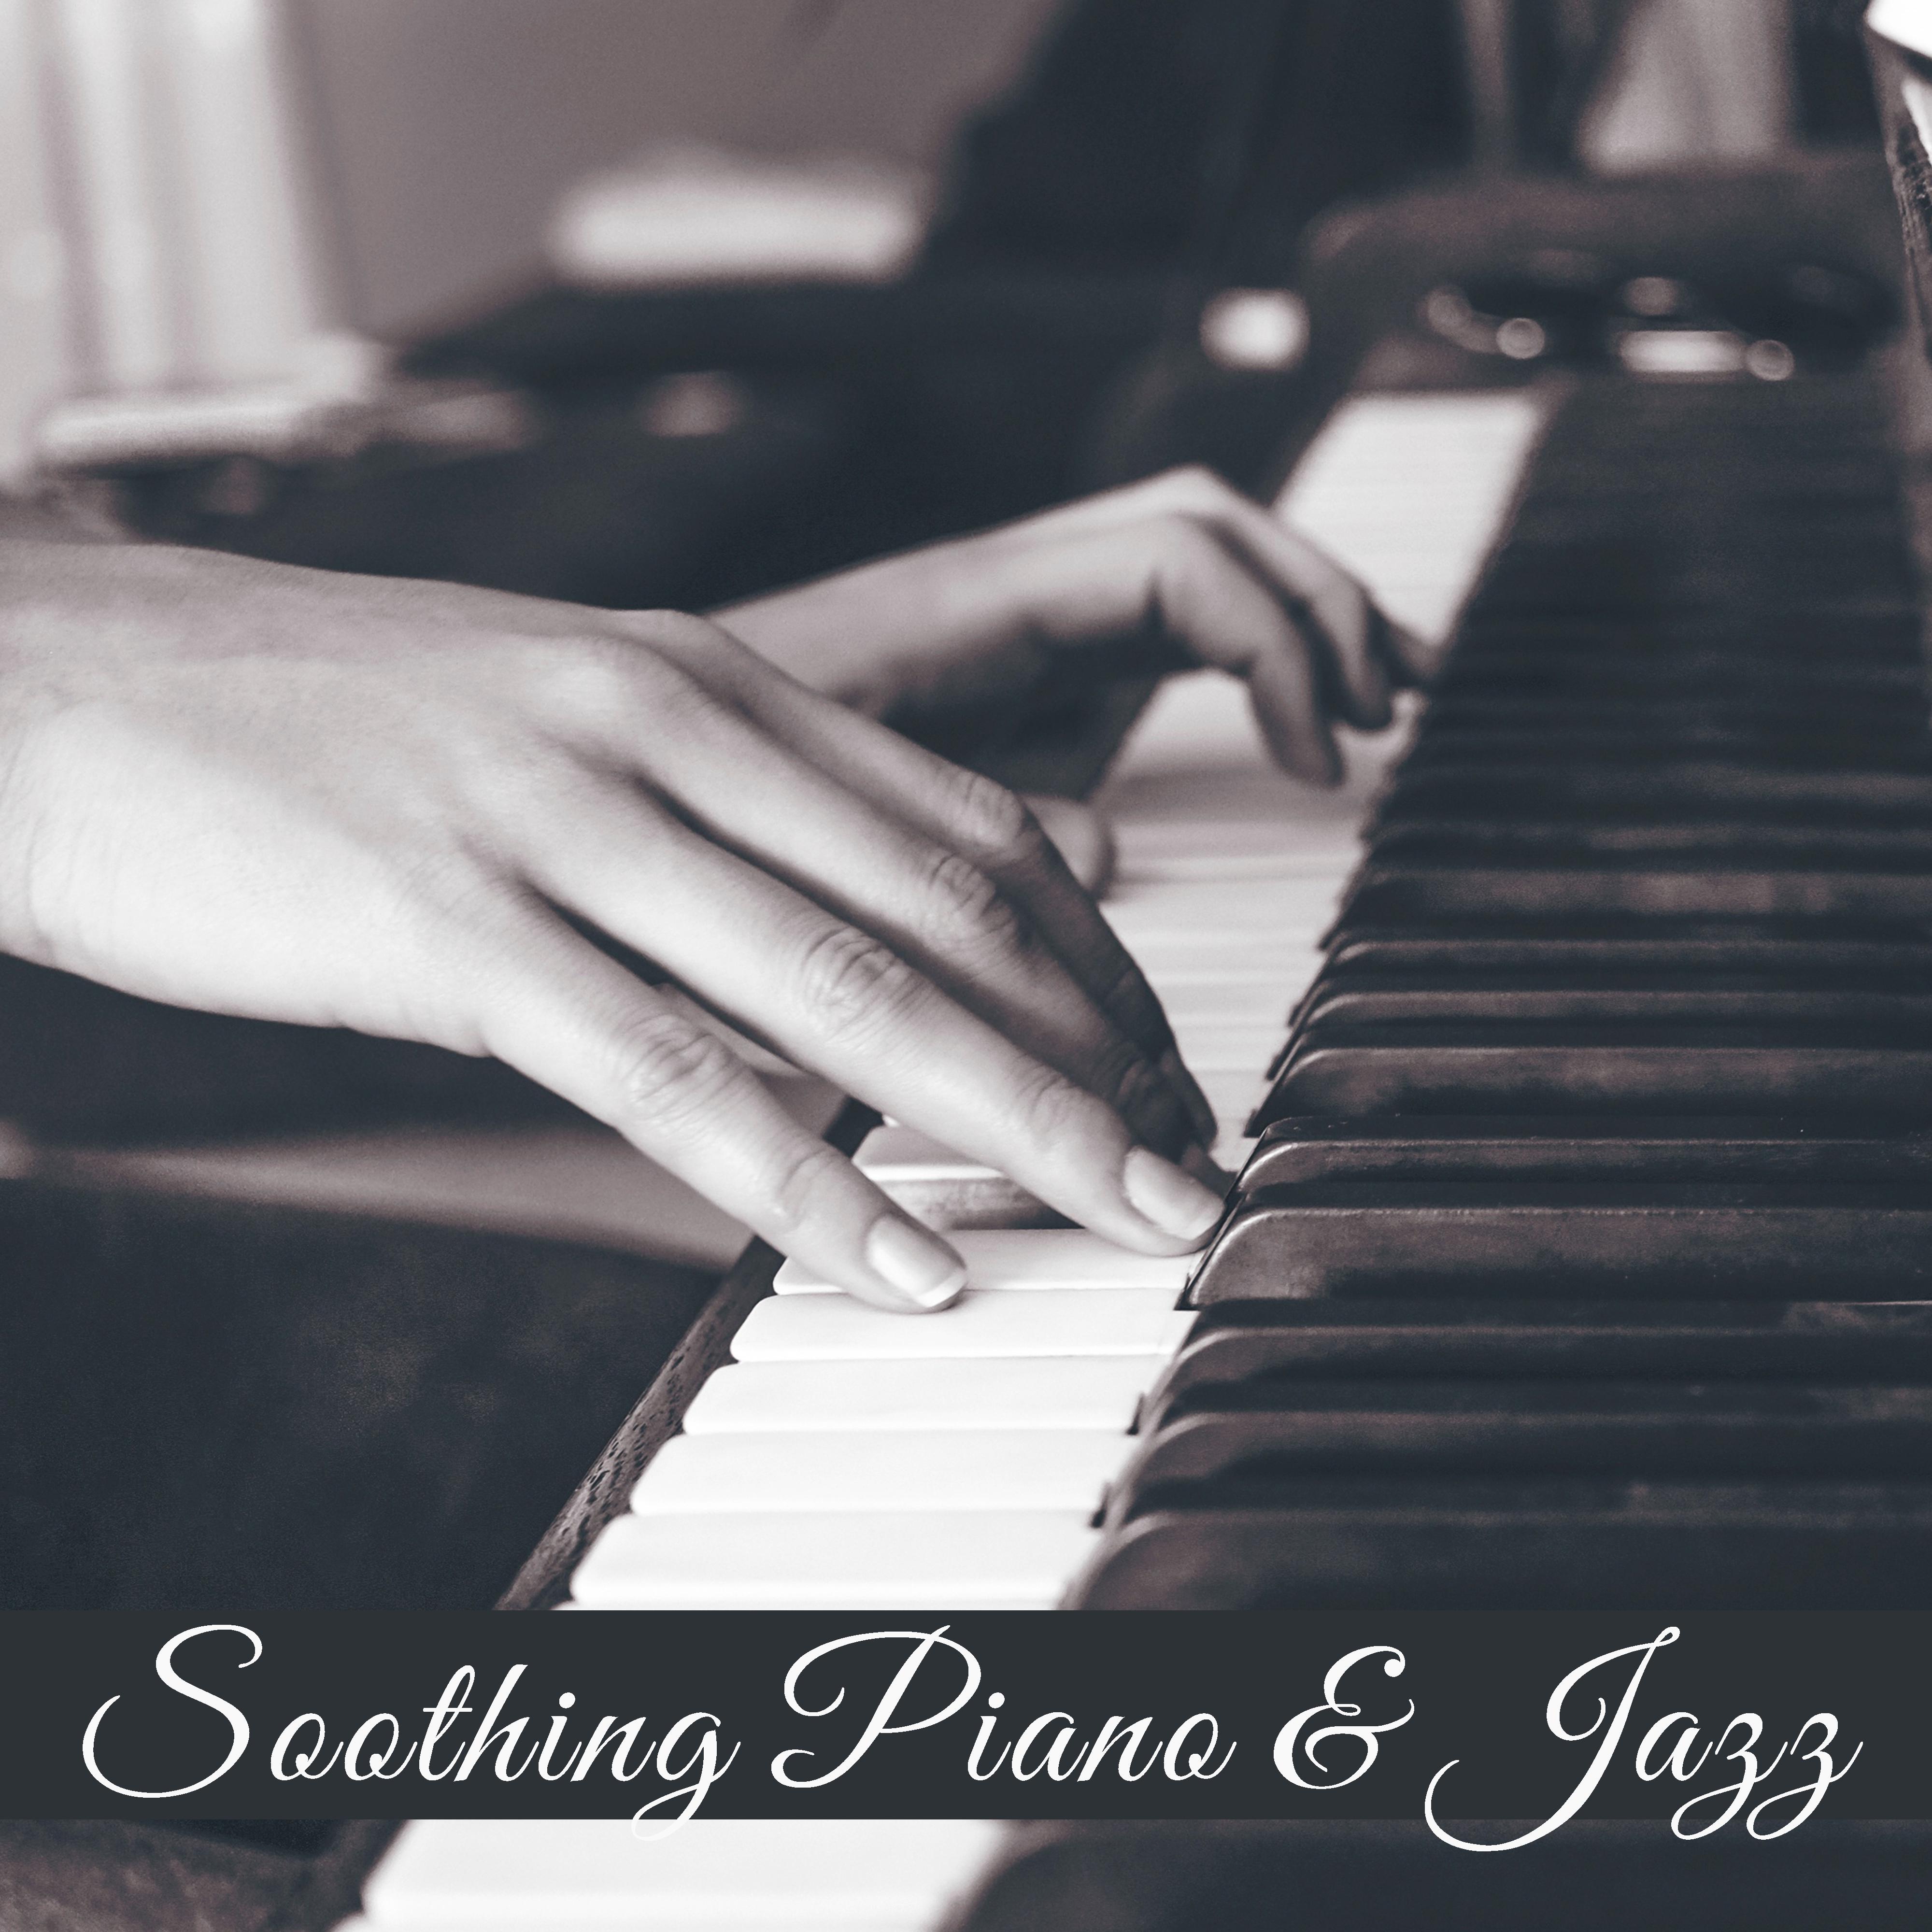 Soothing Piano  Jazz  Pure Sleep, Jazz for Rest, Deep Relief, Mellow Jazz, Gentle Sounds